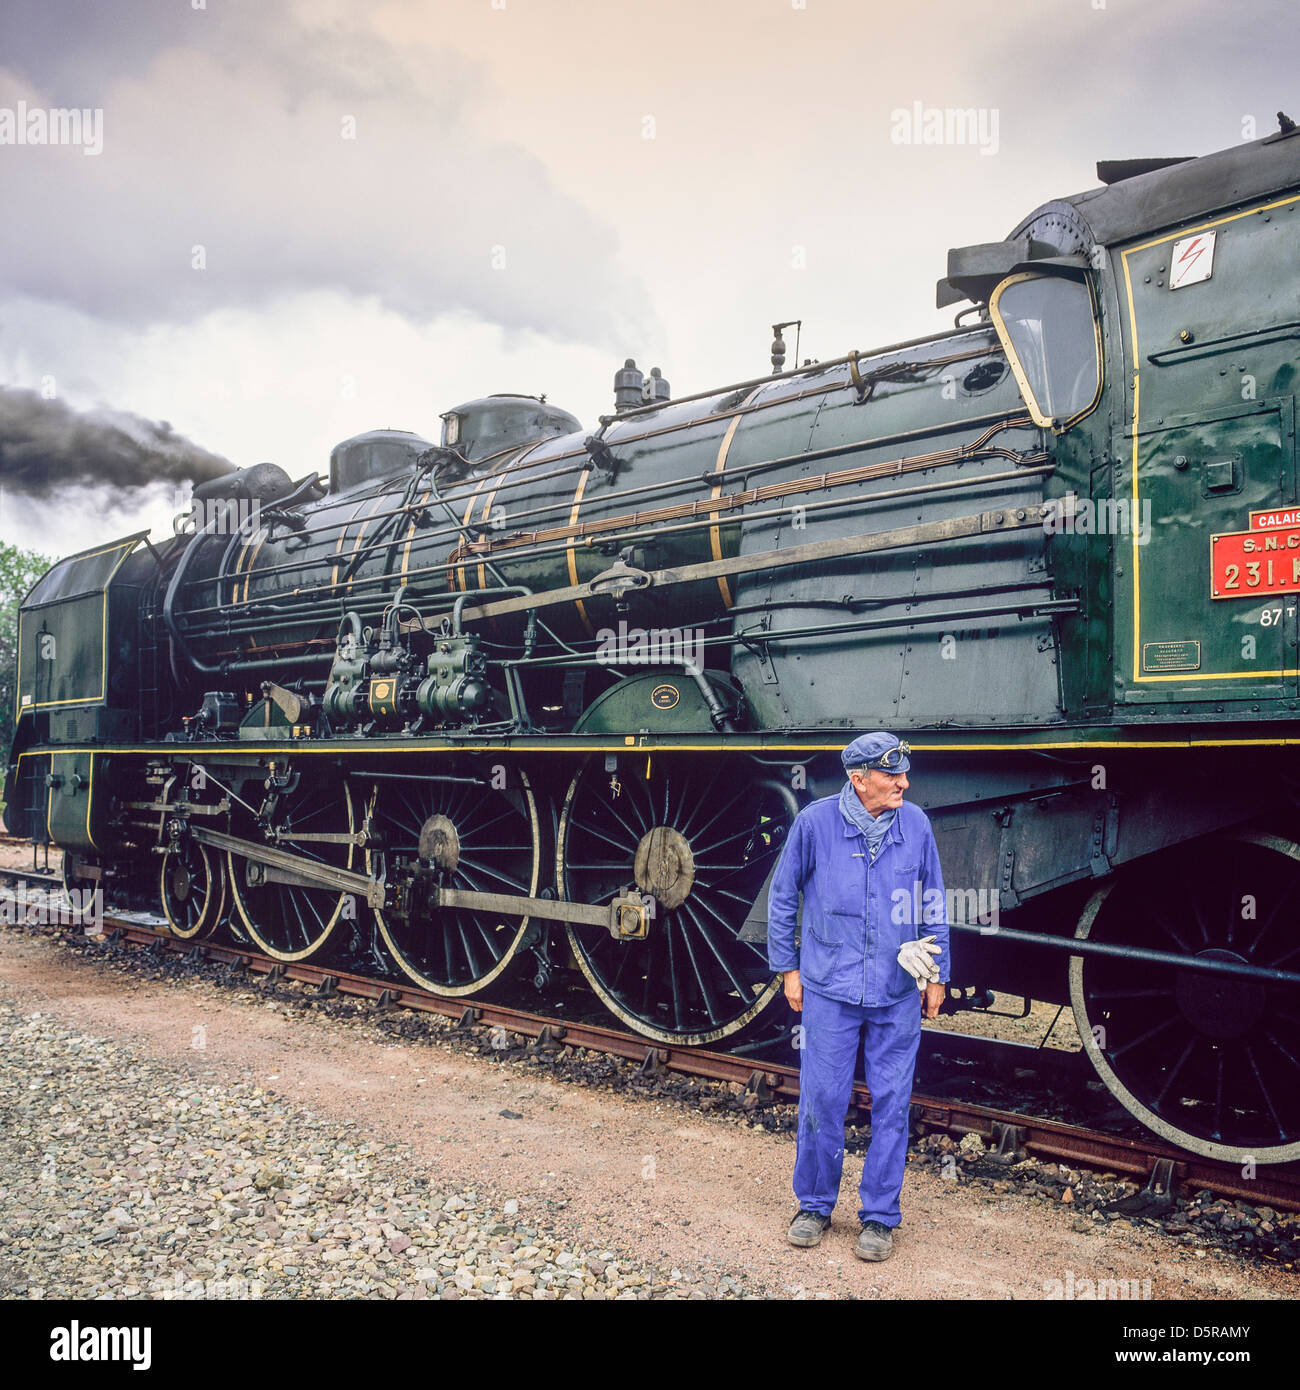 Engineer with historic steam locomotive "Pacific PLM 231 K 8" of "Paimpol-Pontrieux" train Brittany France Europe Stock Photo